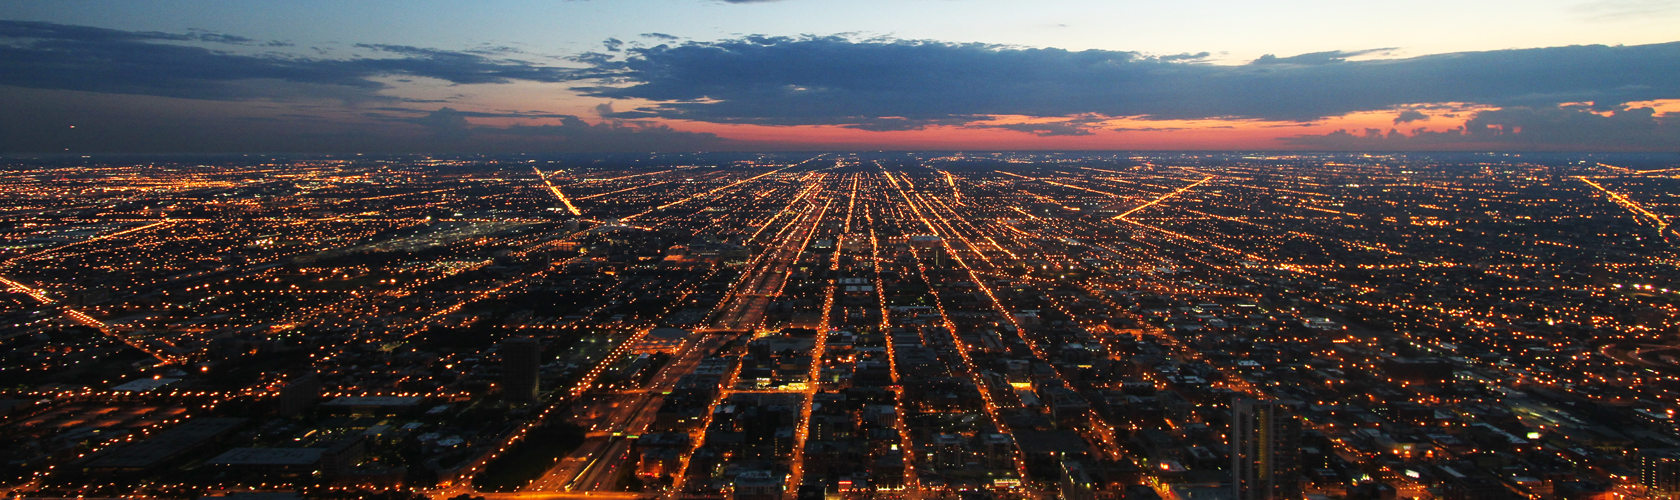 Chicago dawn from Sears Tower